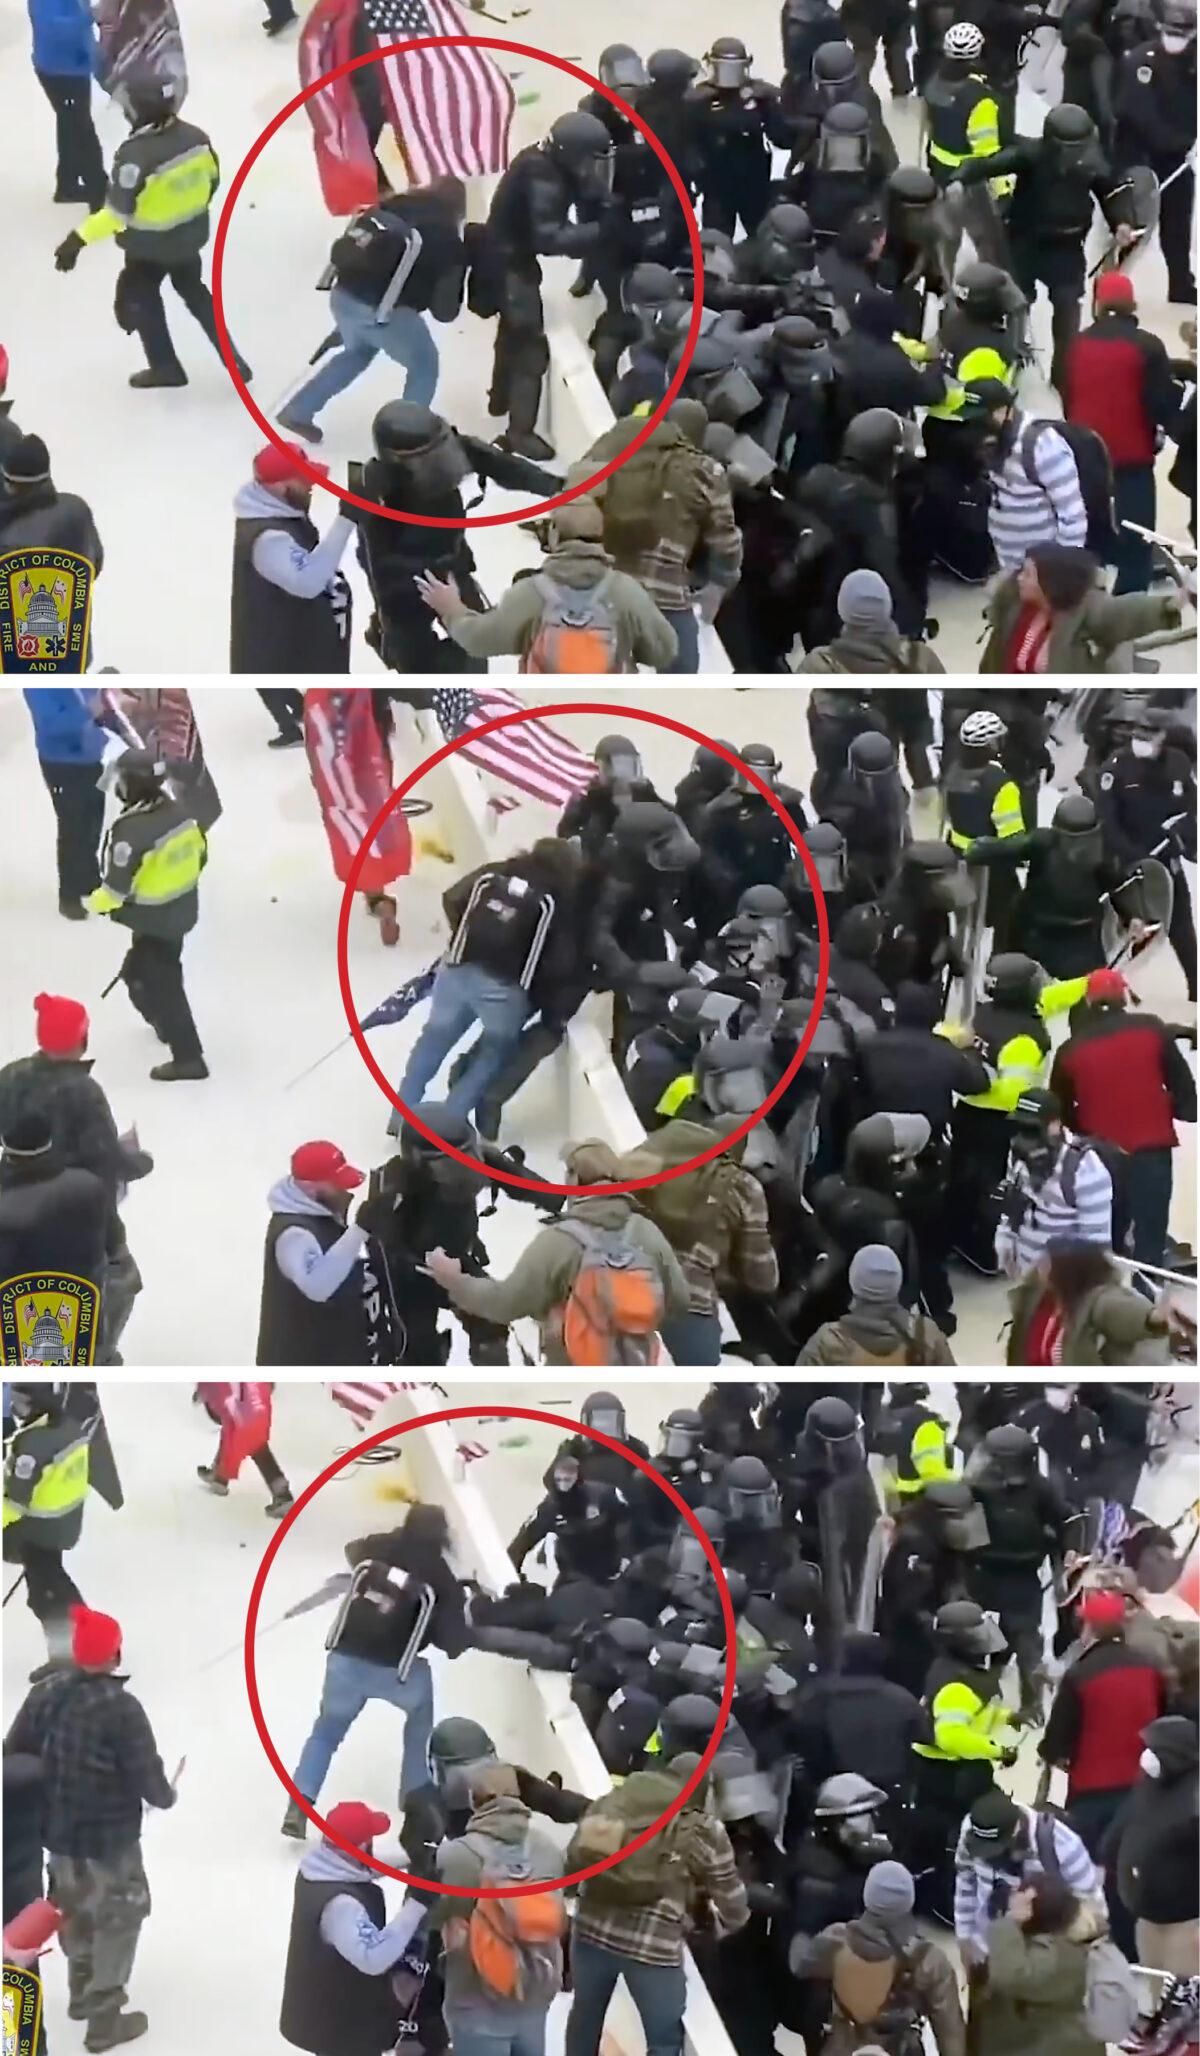 A man identified by prosecutors as Ralph J. Celentano III blindsided a U.S. Capitol Police officer on the Capitol's West Terrace on Jan. 6, 2021. (DC Fire and EMS YouTube/Screenshots and graphic via The Epoch Times)